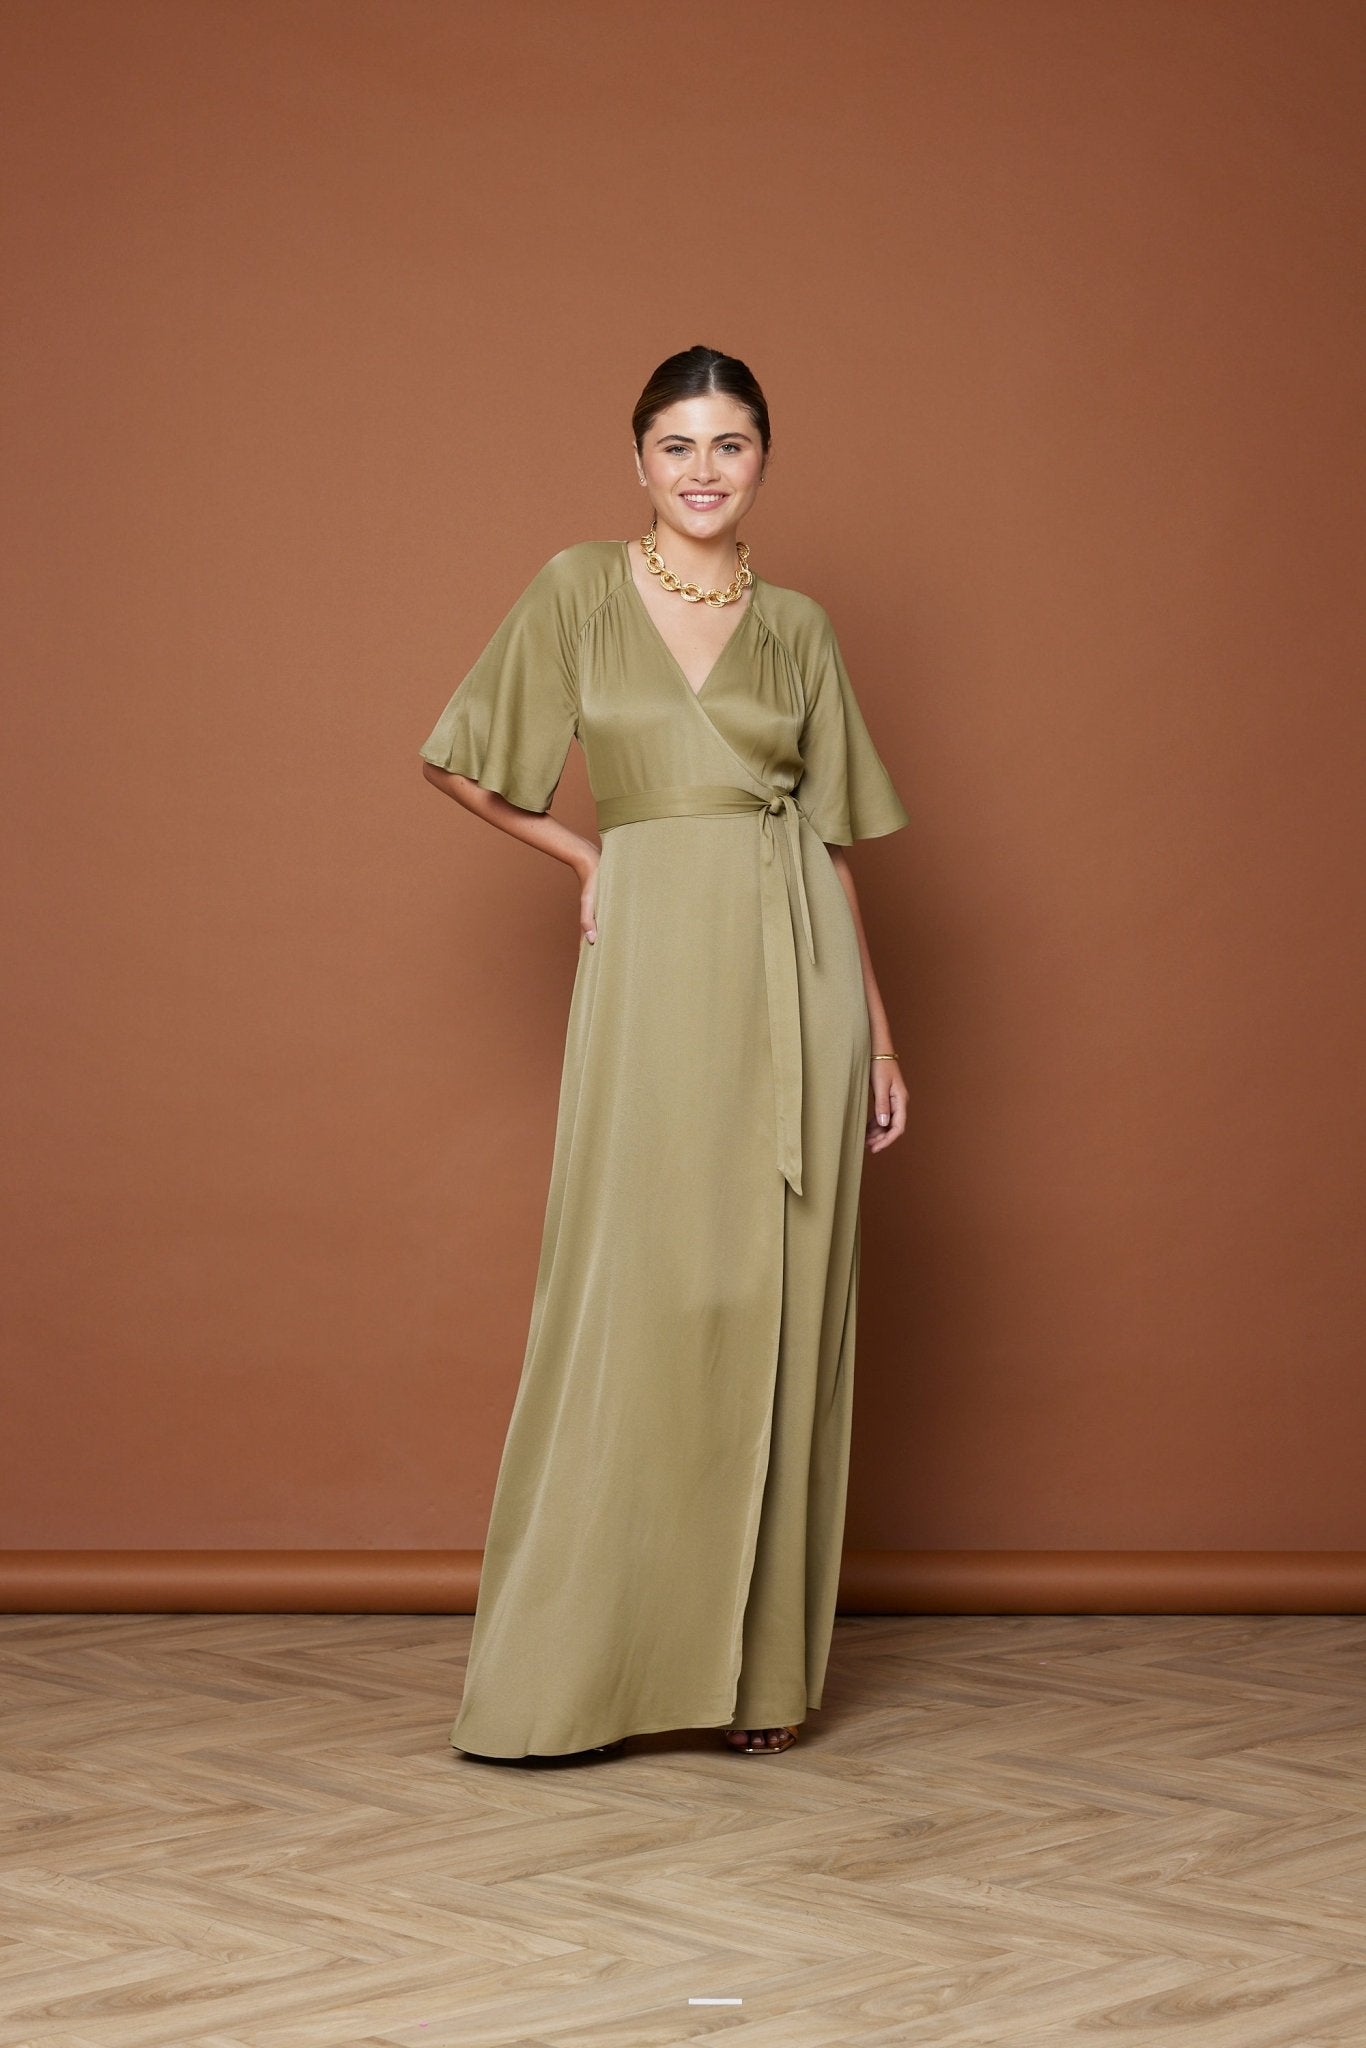 Margot Satin Wrap Dress - Olive Green NEW - Maids to Measure